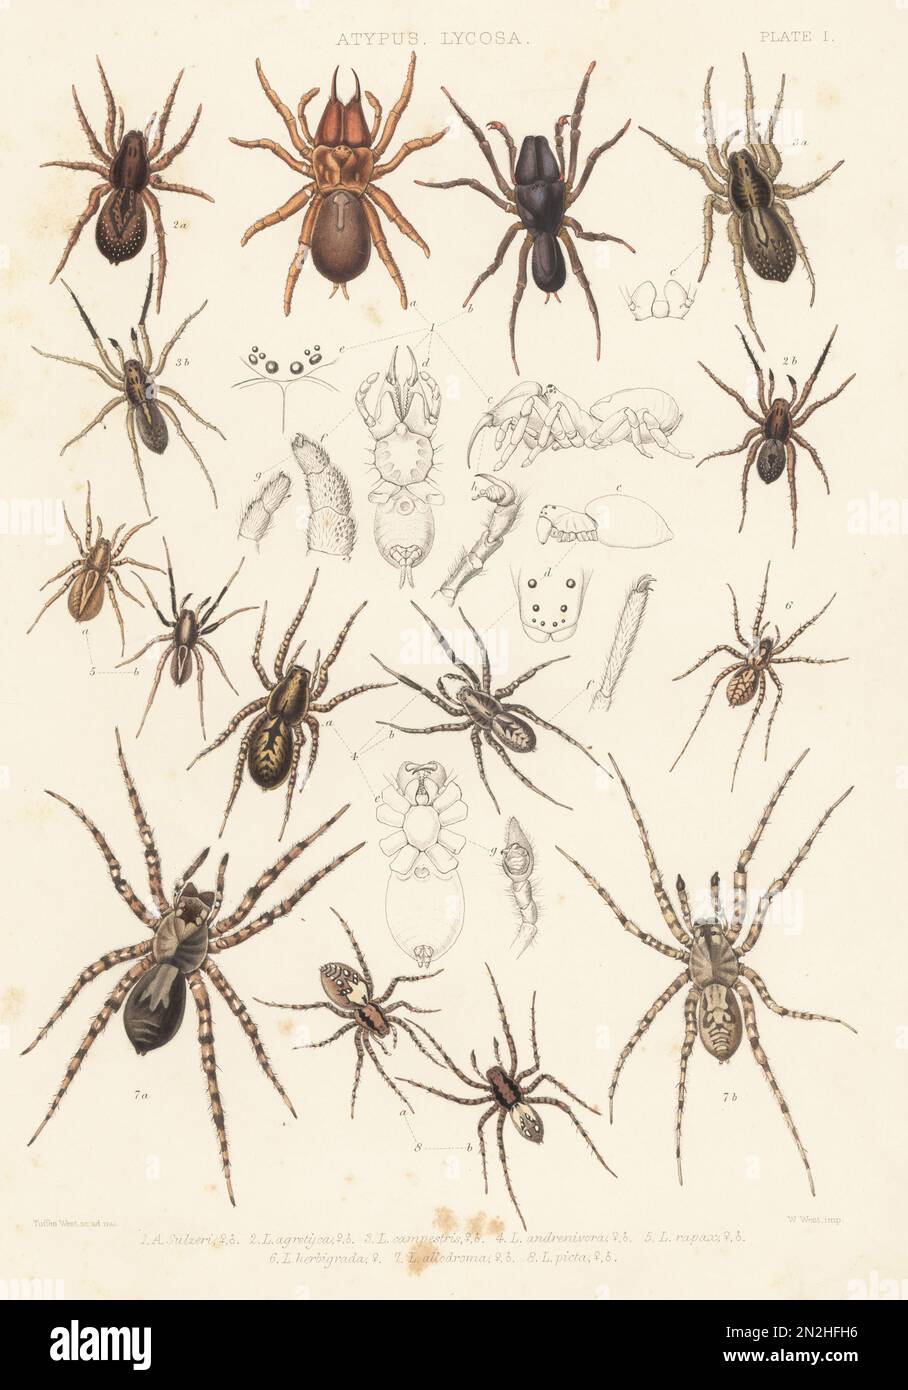 Purse web spider, Atypux affinis 1, ground wolf spider, Trochosa terricola 2, rustic wolf spider, Trochosa ruricola 3, wolf spider, Alopecosa accentuata 4, Alopecosa pulverulenta 5, Pardosa palustris 6, Arctosa cinerea 7 and sand bear spider, Arctosa perita 8. Handcoloured lithograph by W. West after Tuffen West from John Blackwall’s A History of the Spiders of Great Britain and Ireland, Ray Society, London, 1861. Stock Photo